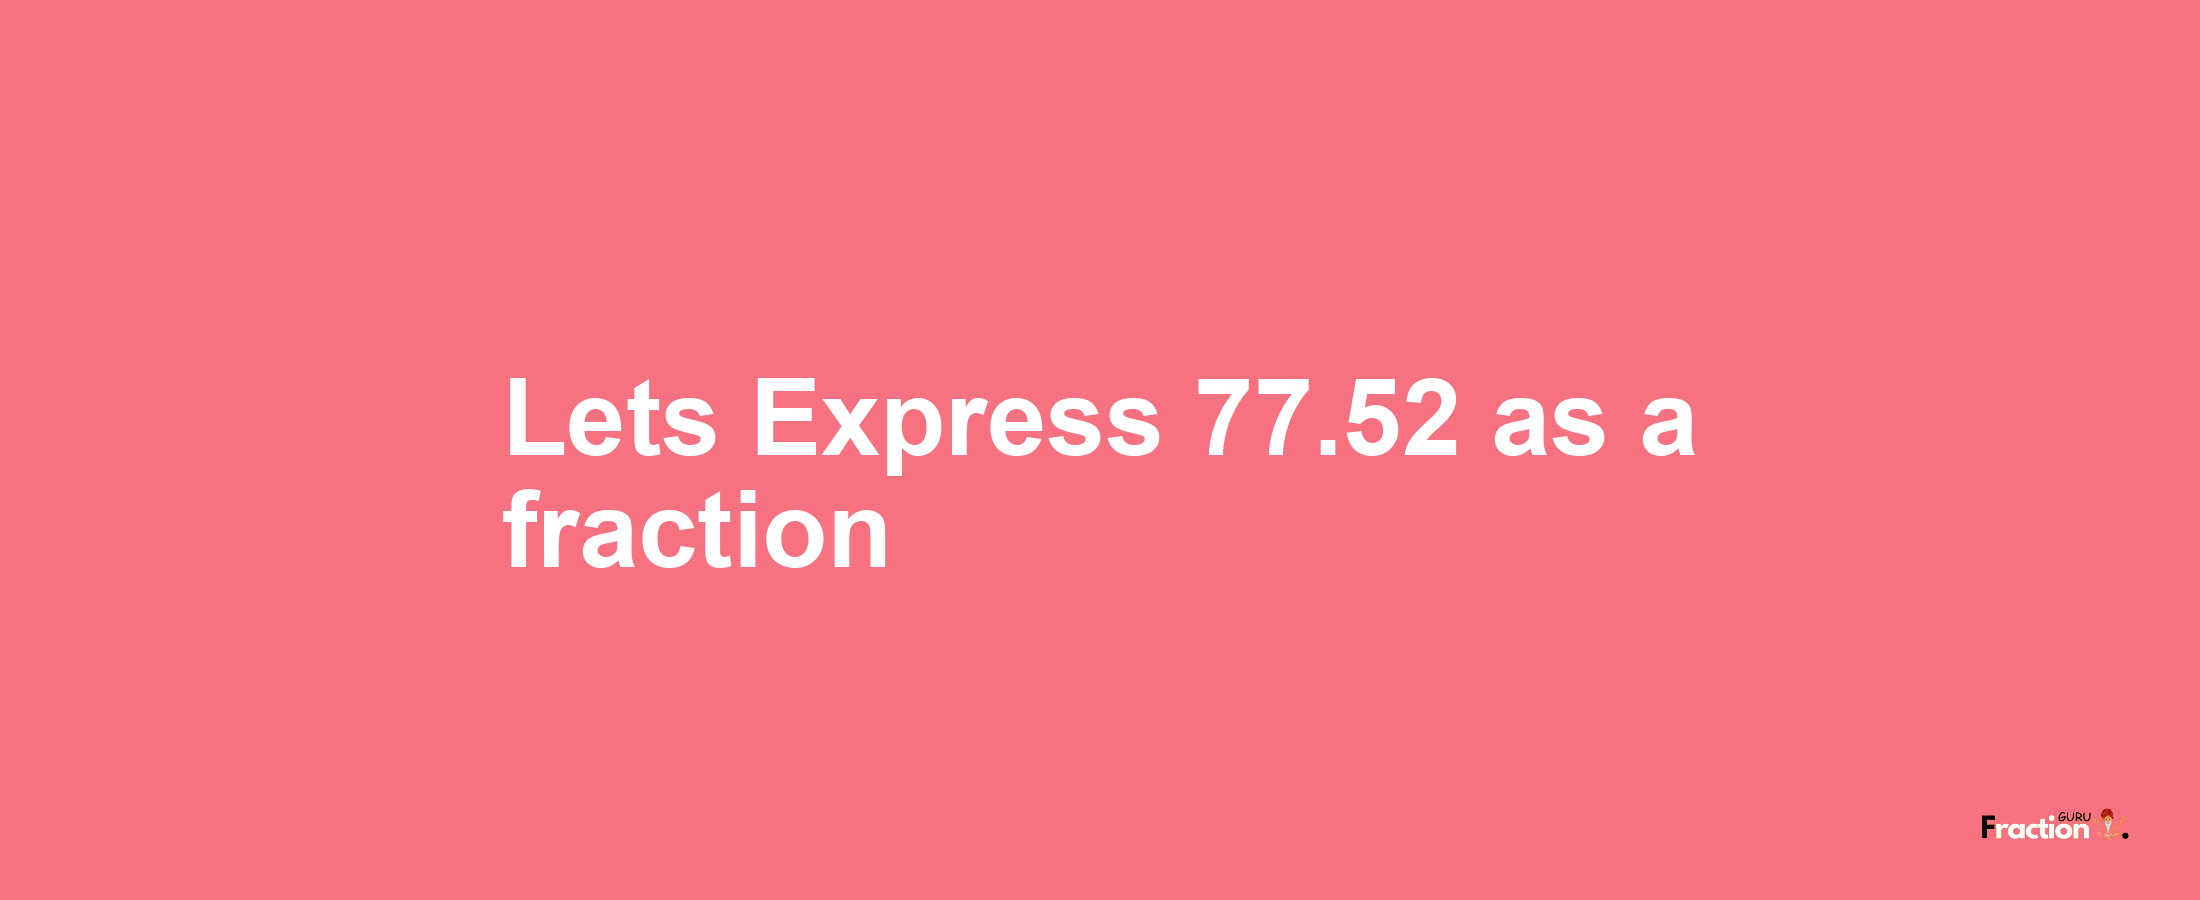 Lets Express 77.52 as afraction